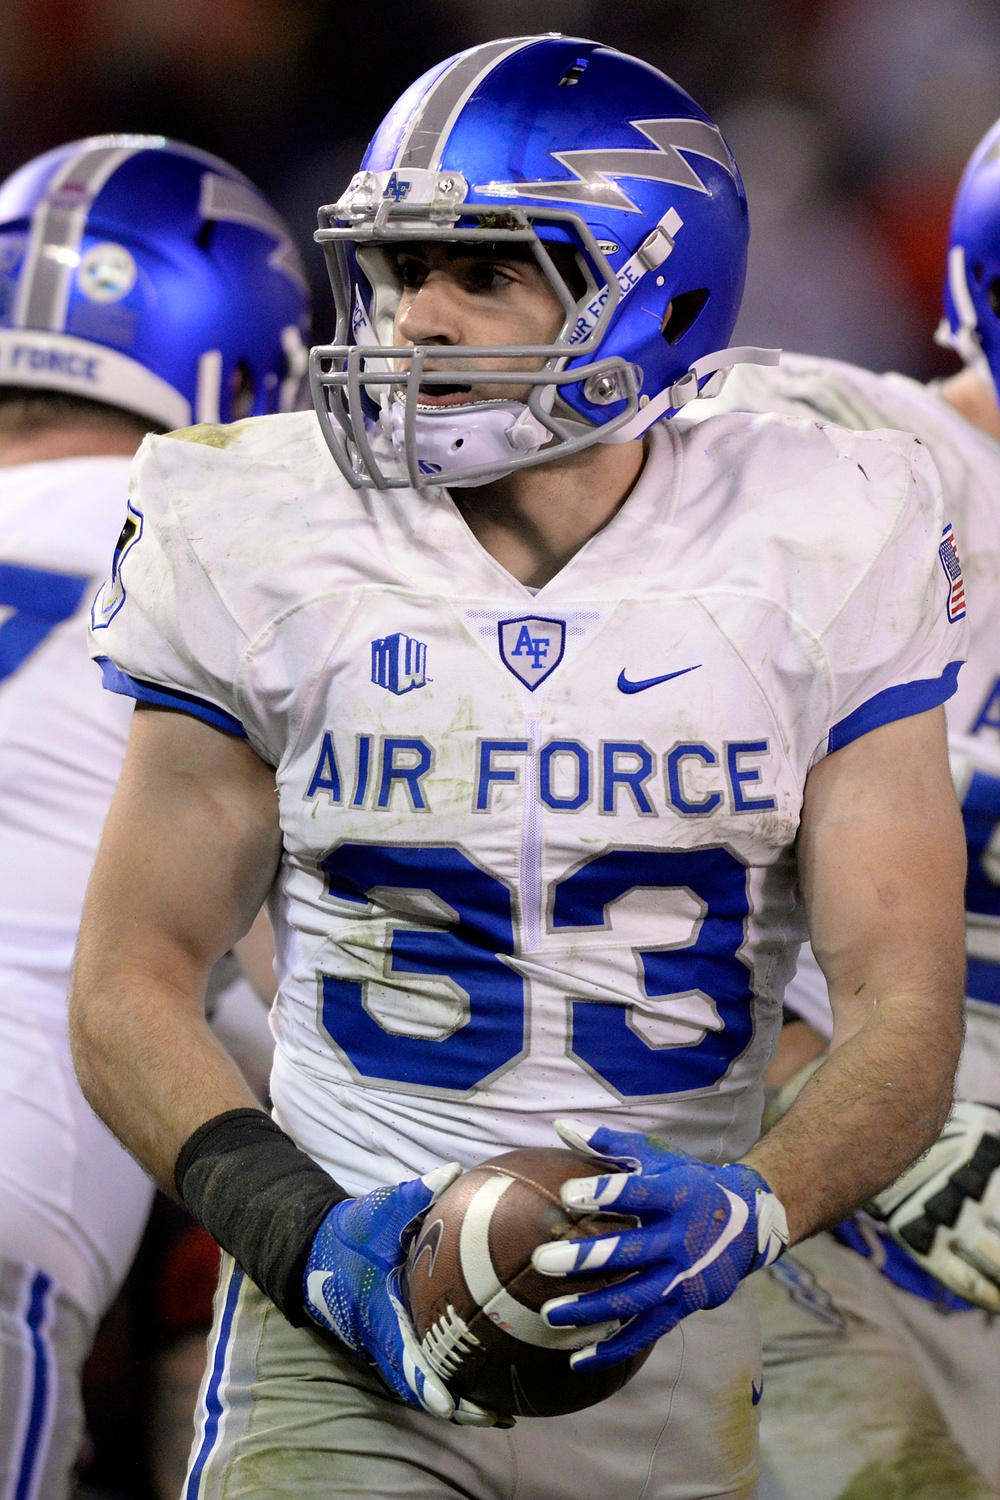 US Air Force Academy vs. San Diego State University in the Mountain West Conference Championship Game